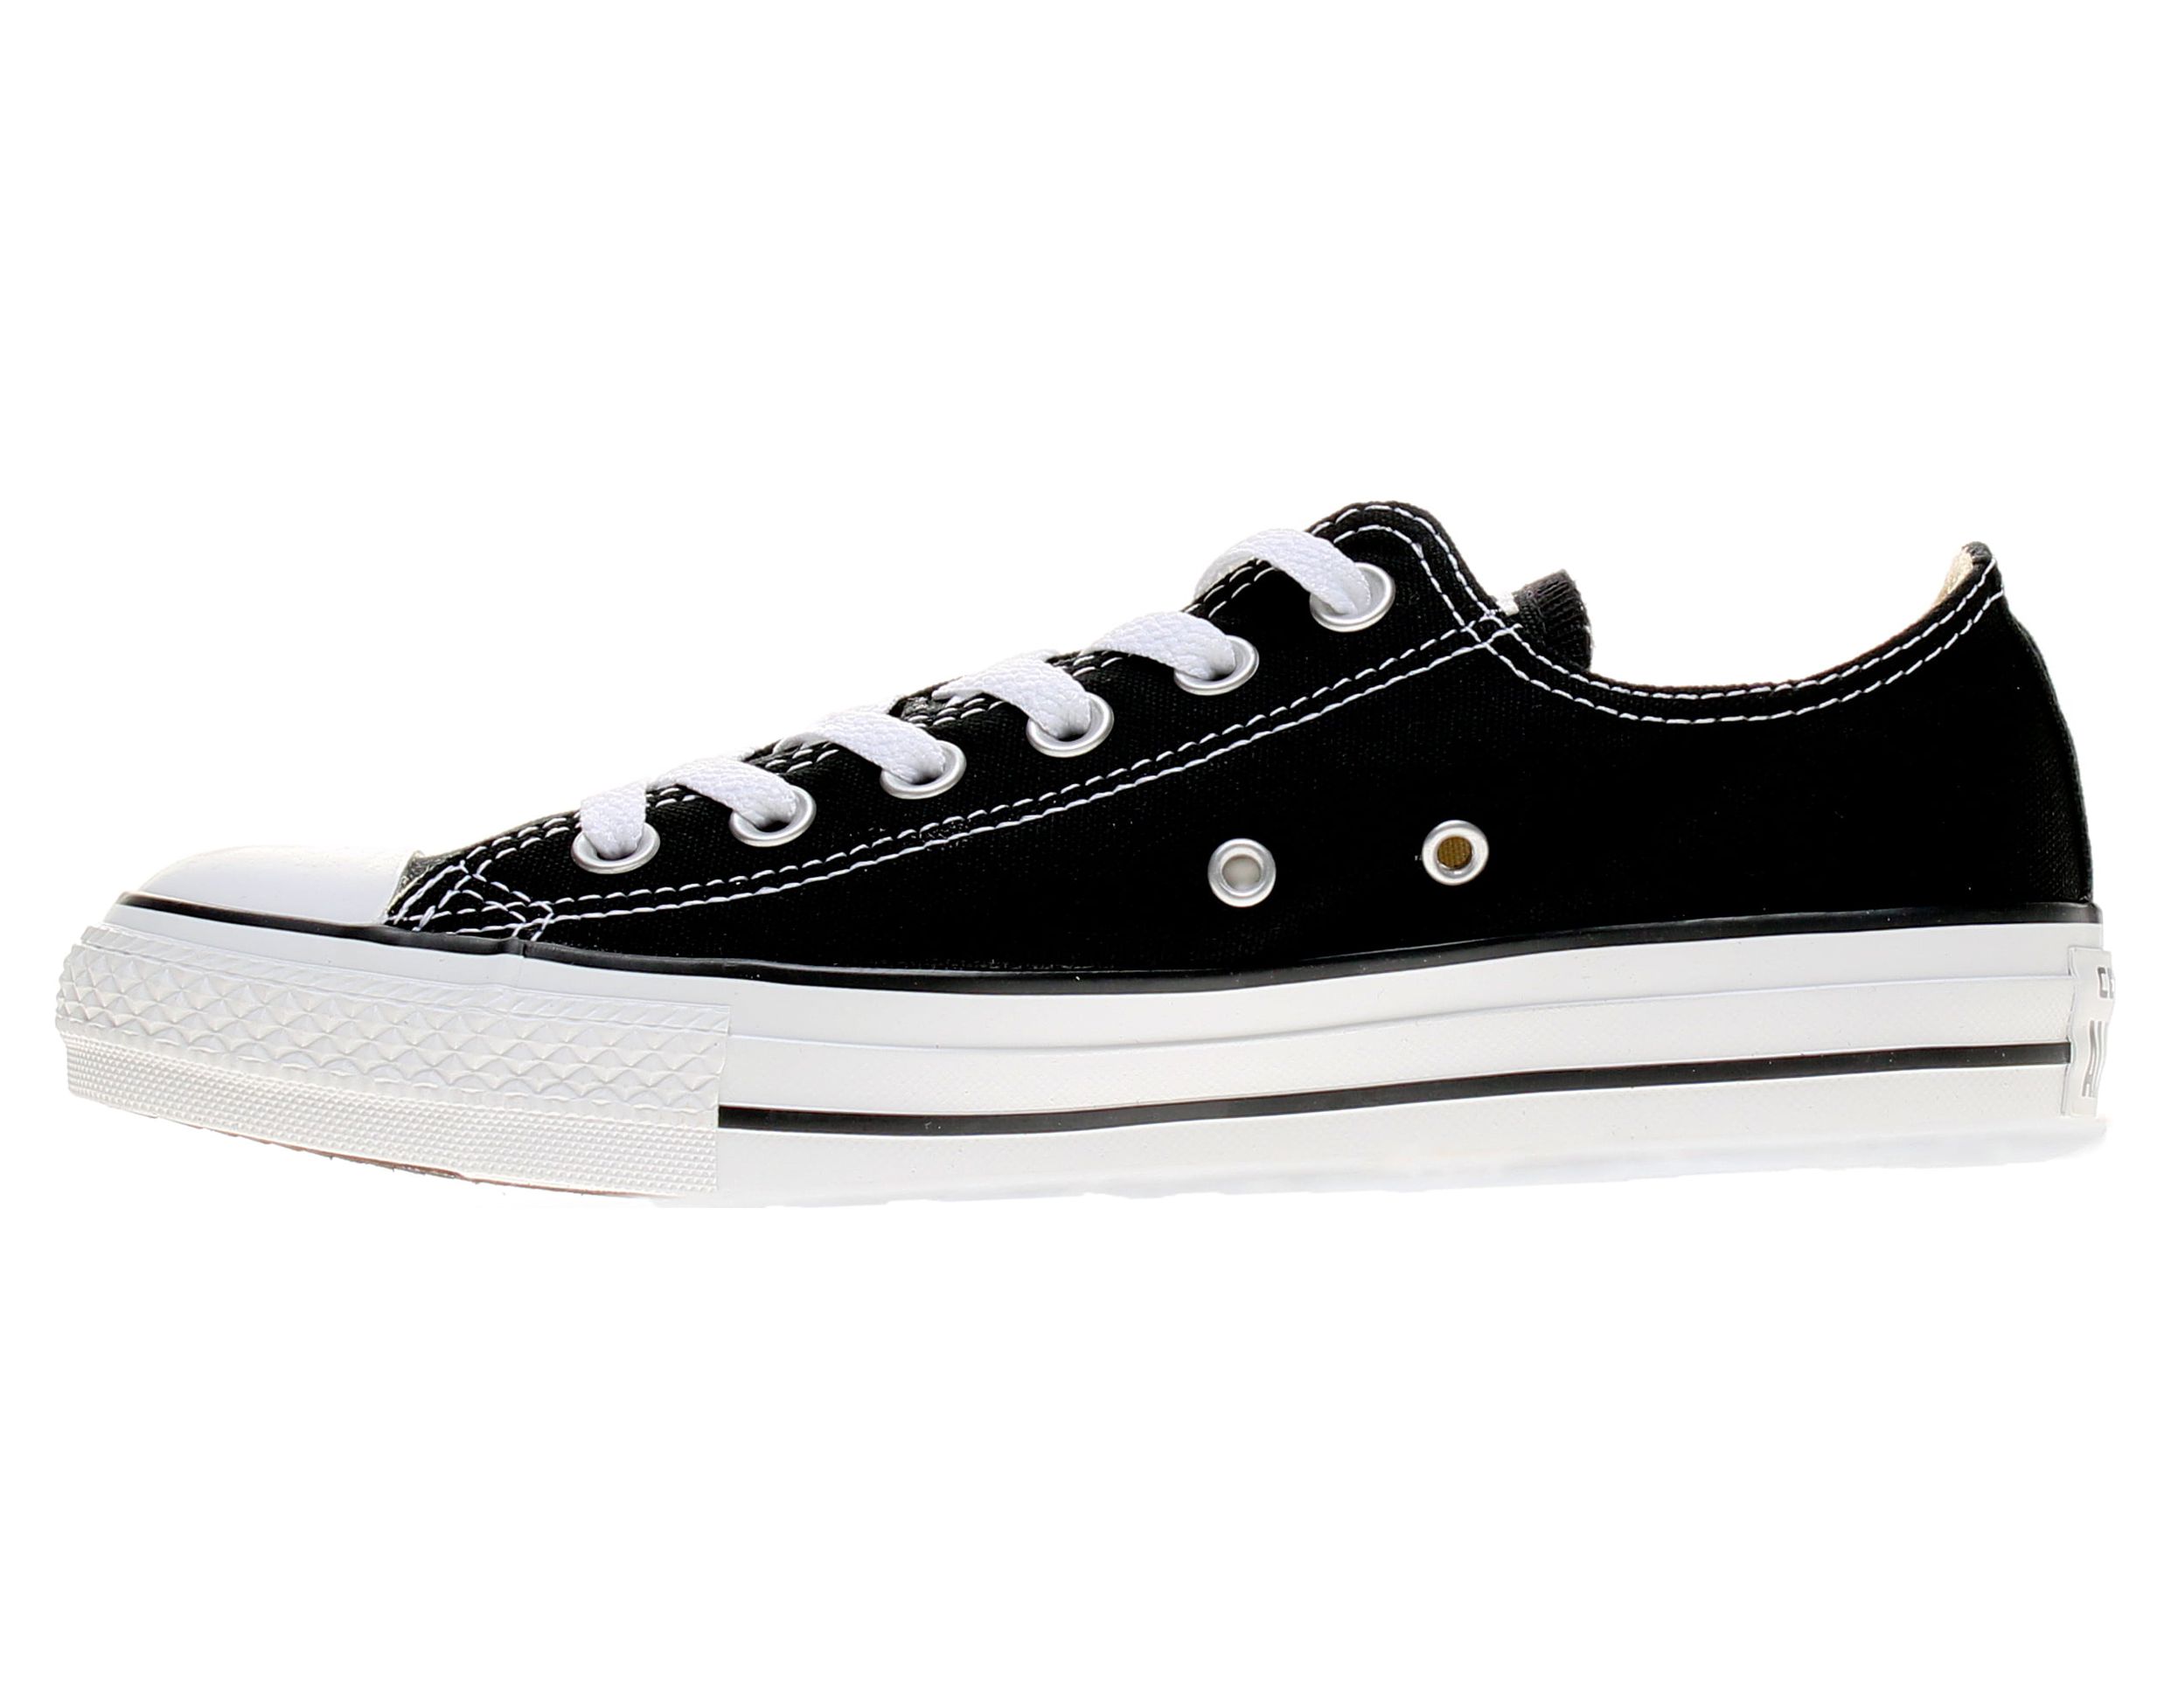 Unisex Chuck Taylor All Star Lo - image 3 of 6